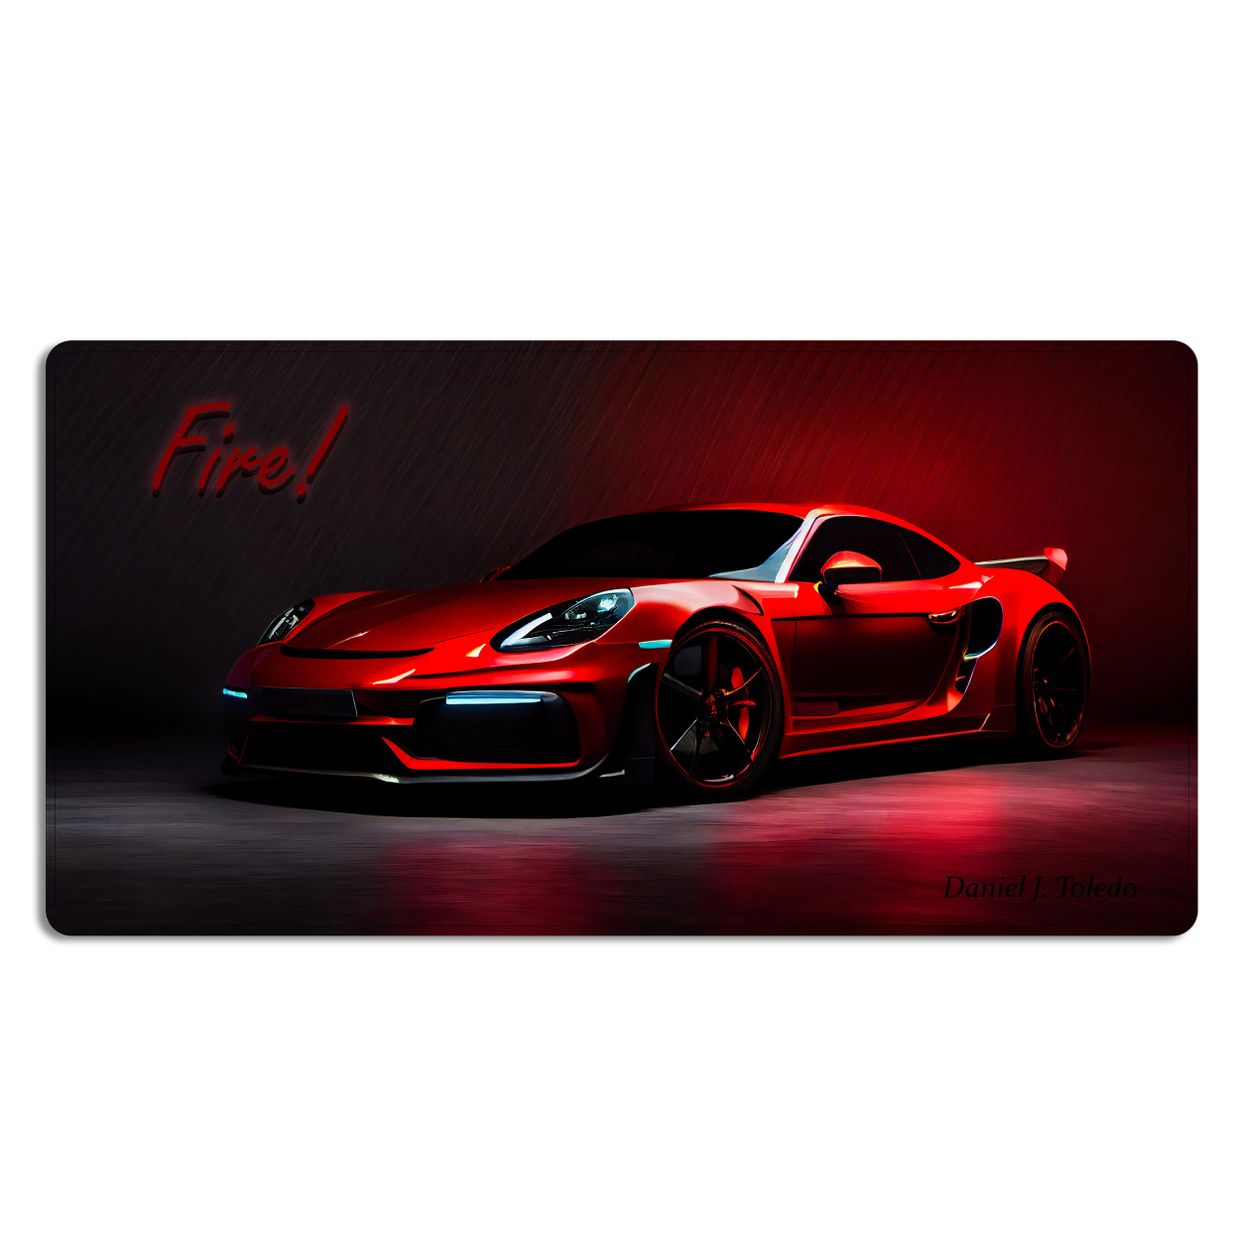 mouse pads printing and design